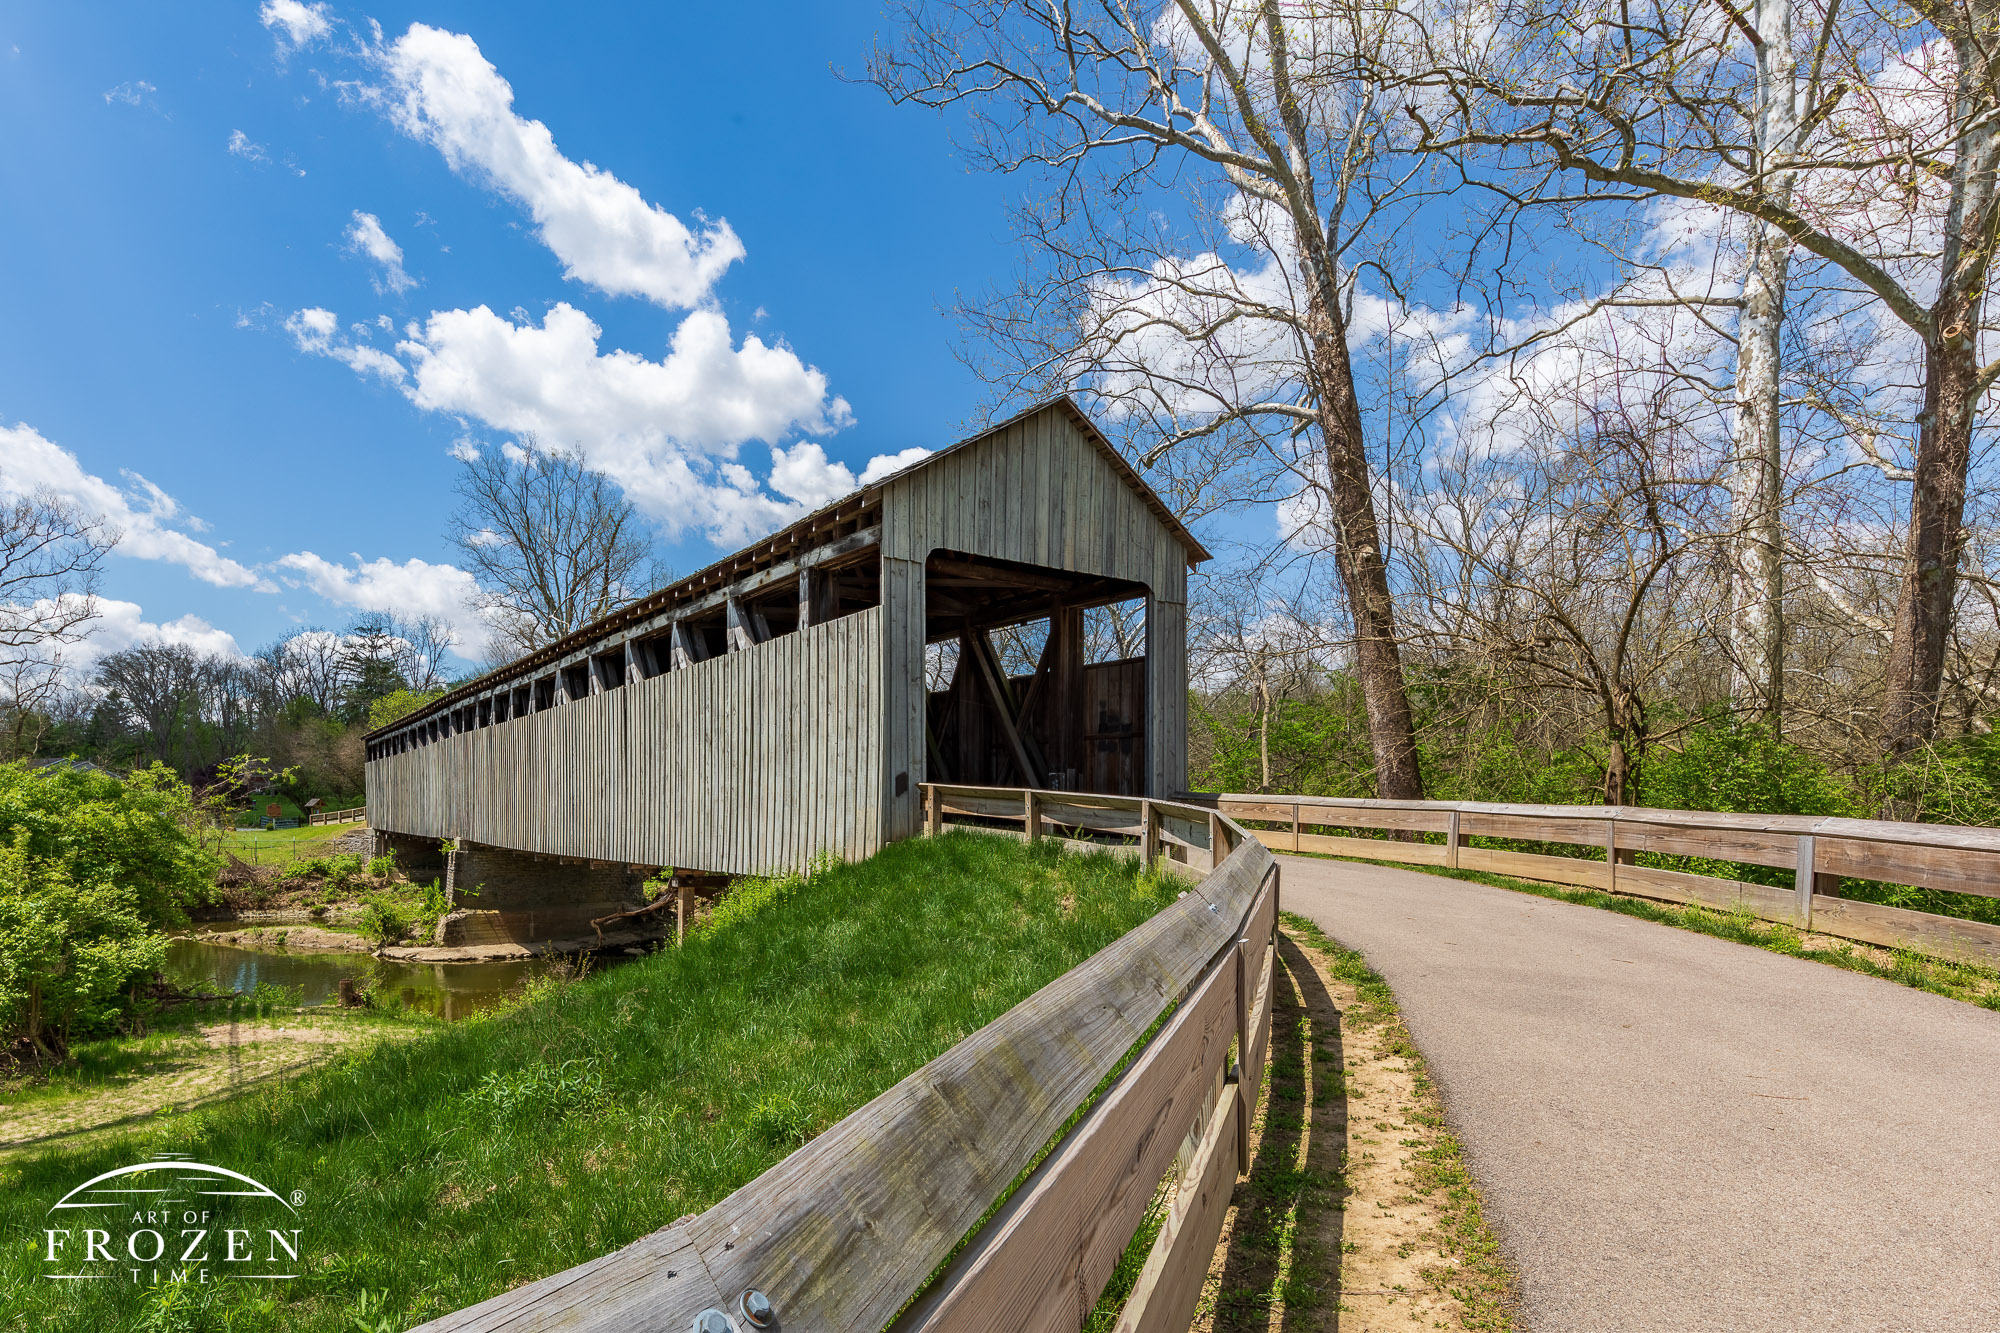 One of the longest covered bridges in Ohio with spans Four Mile Creek on a spring day